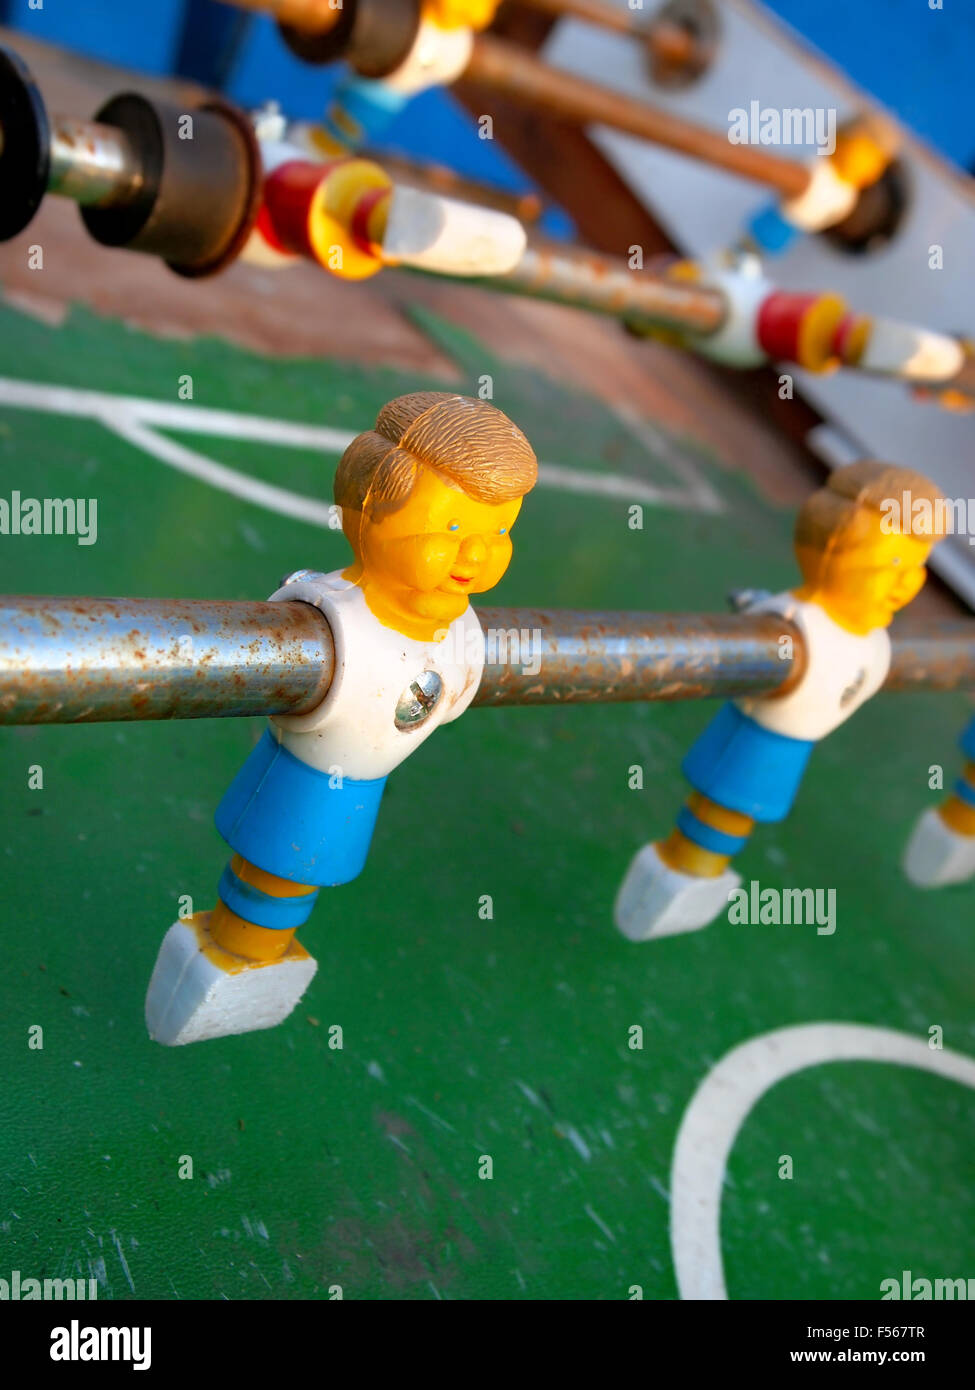 Closeup on a plastic foosball player on a control stick on a rusty old game table. Stock Photo